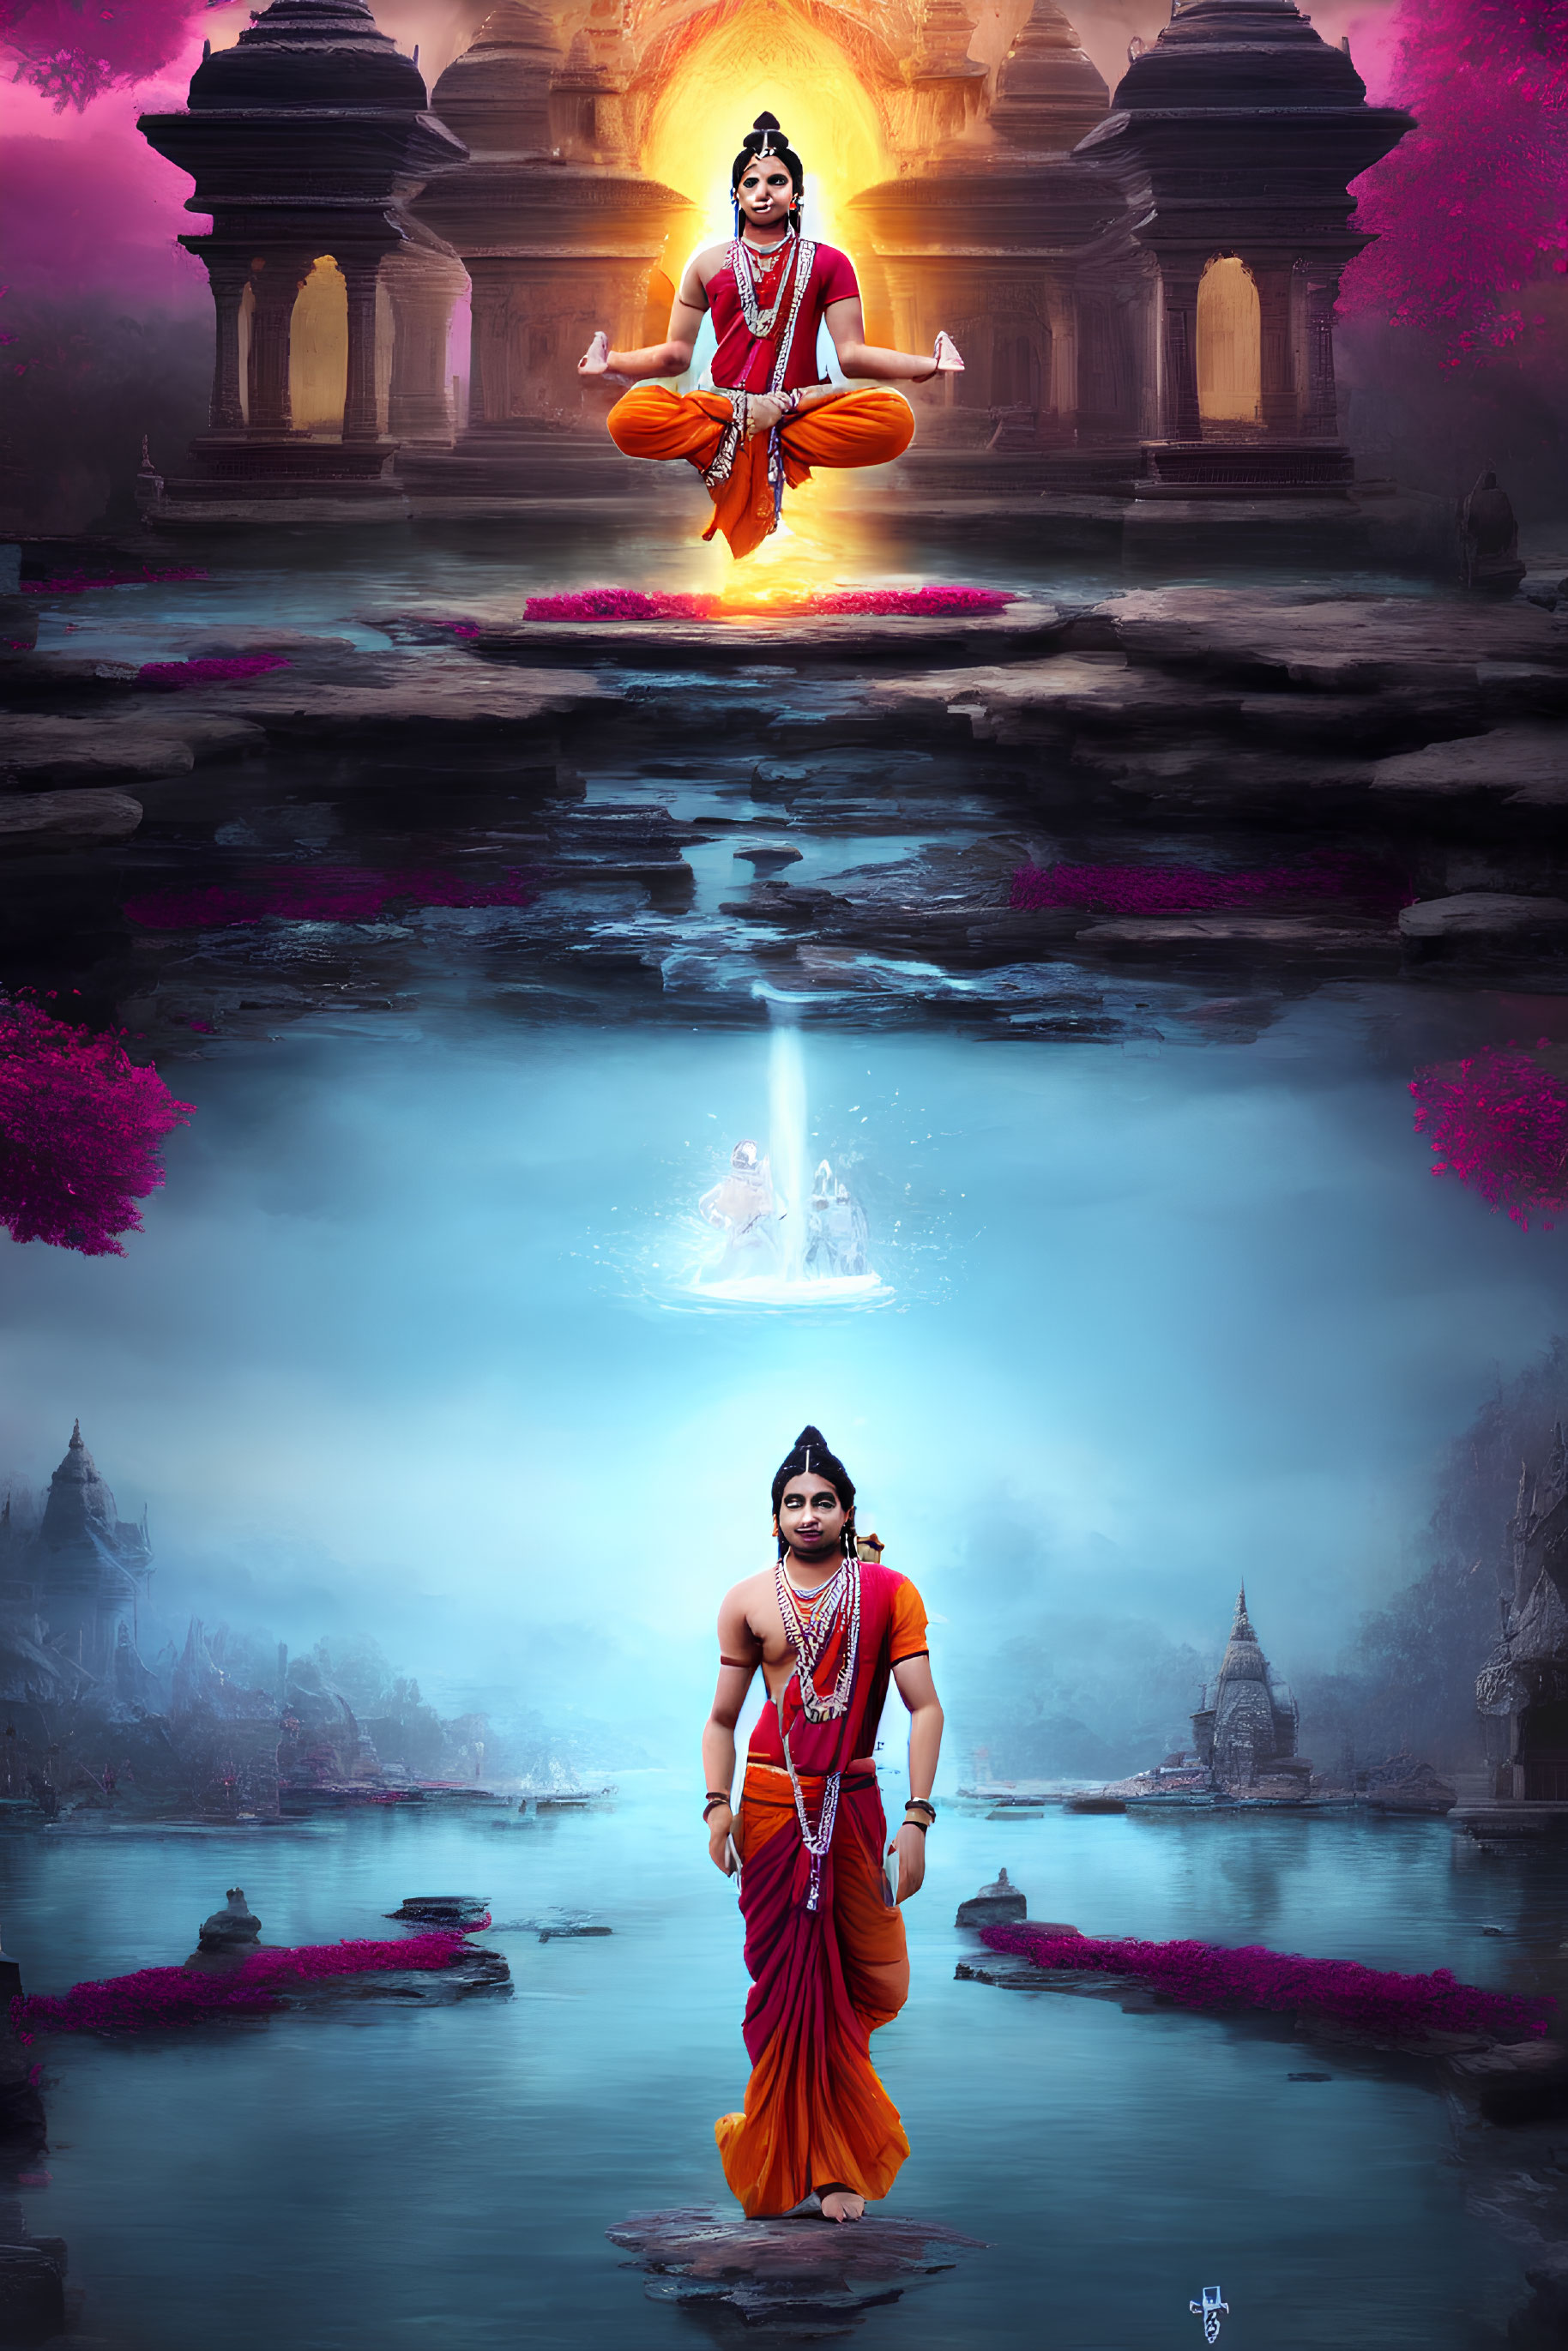 Deity levitating over serene waters with ancient temples in the background